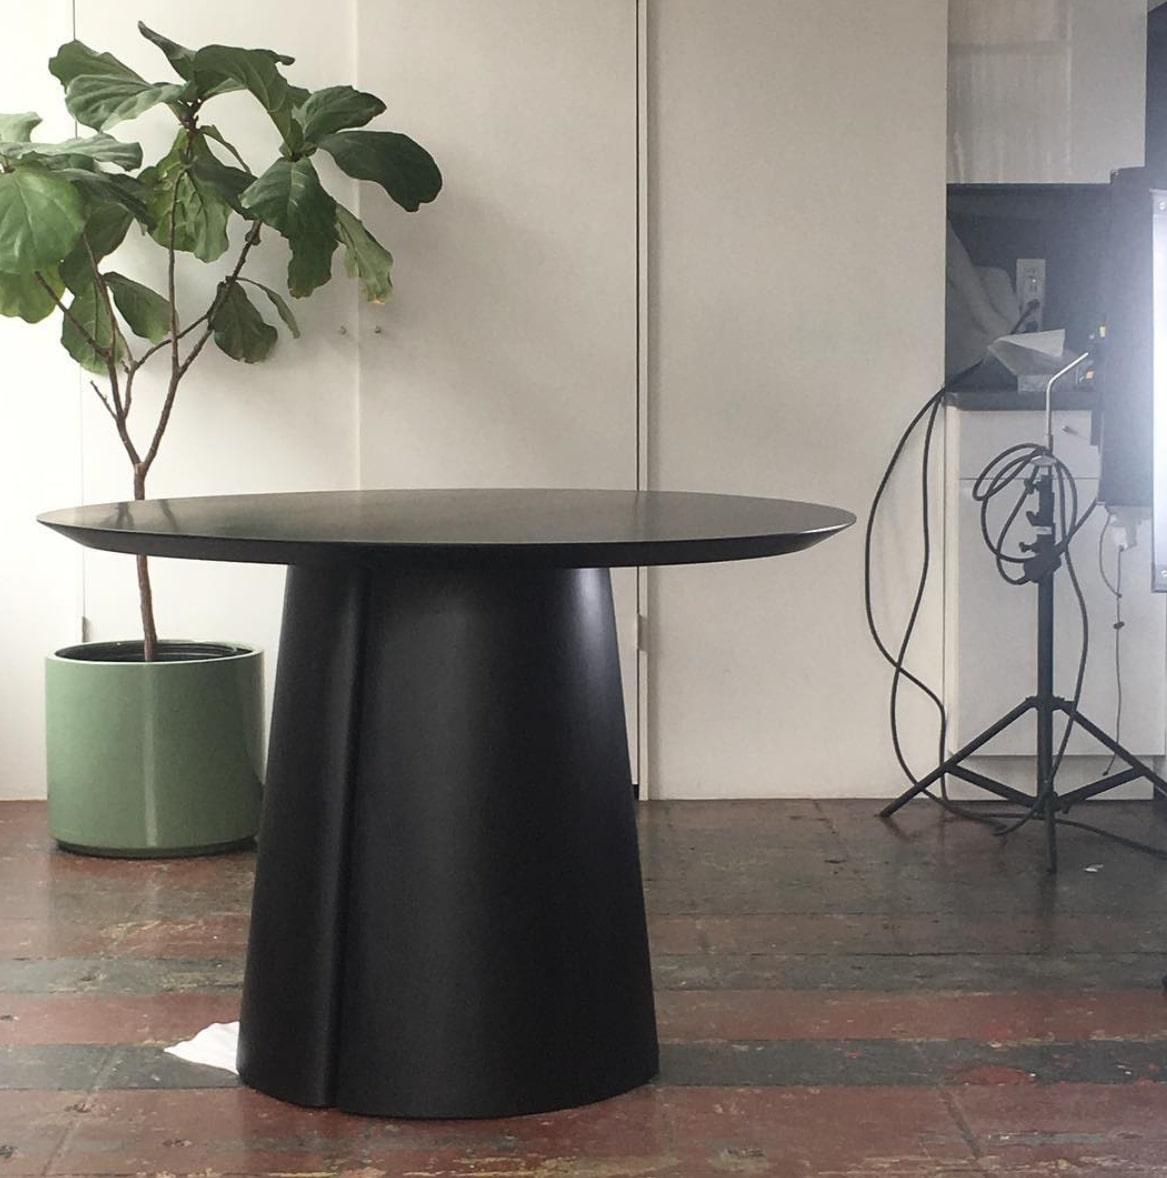 American Column Round Table by Black Table Studio, Black, Represented by Tuleste Factory